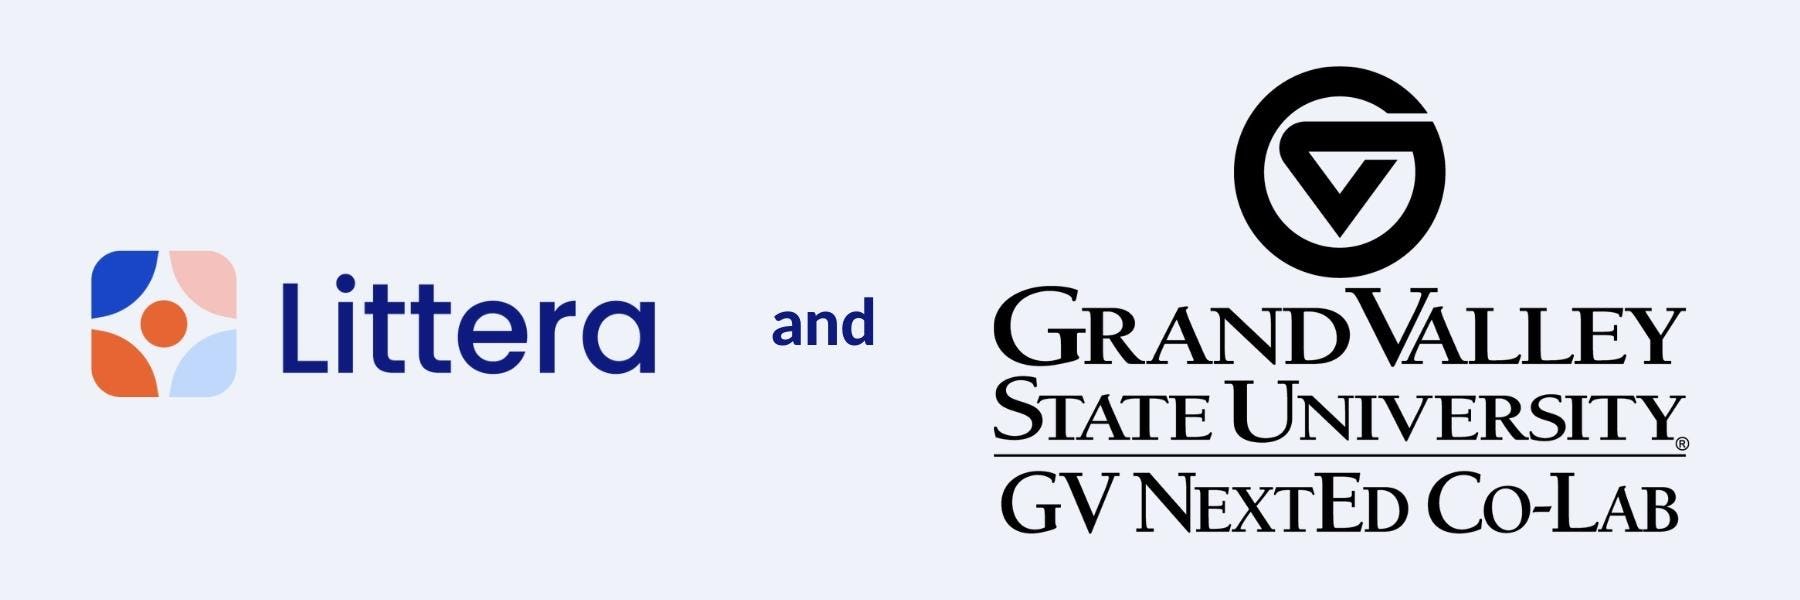 Grand Valley State University and Littera Education Partner to Provide High-Impact Tutoring to Every K-12 Student in Michigan